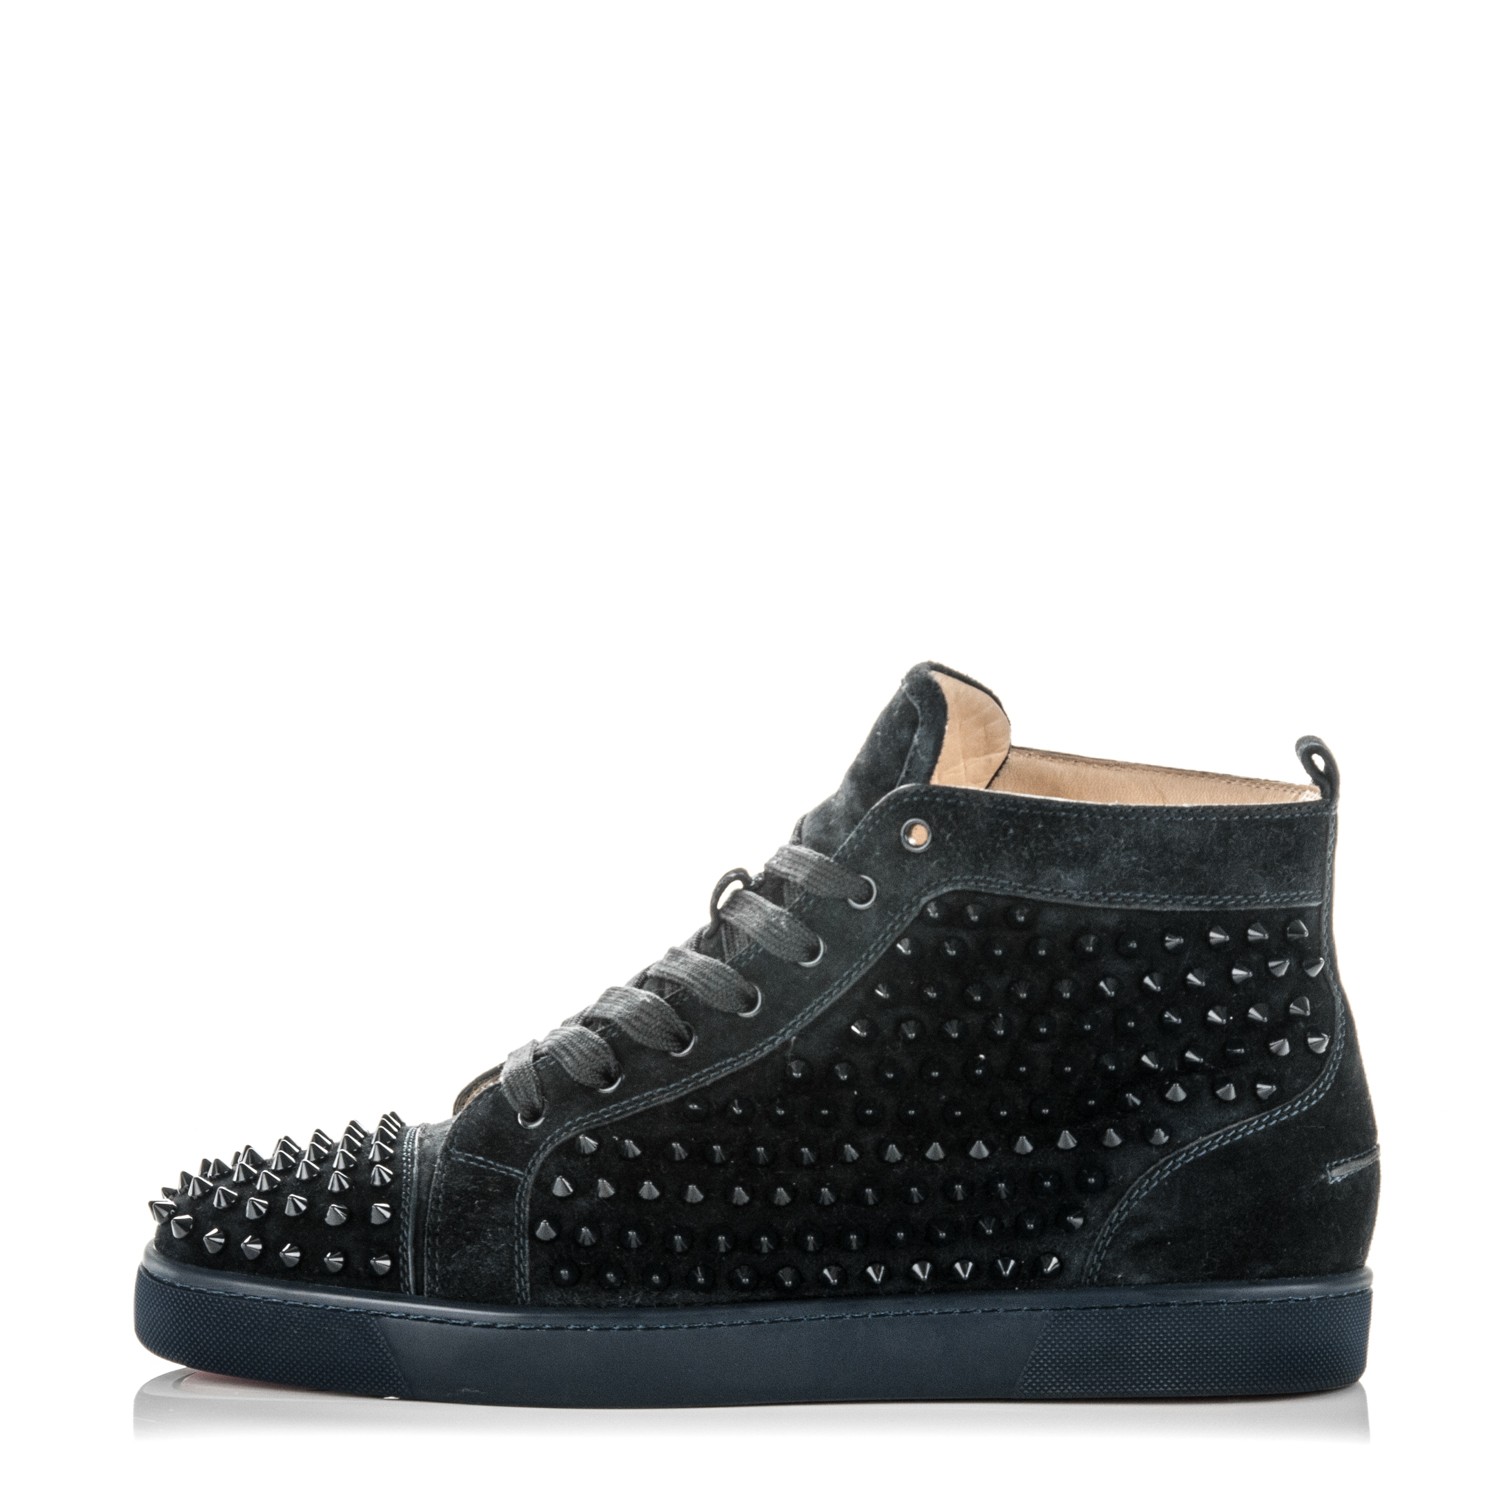 christian louboutin mens spiked sneakers